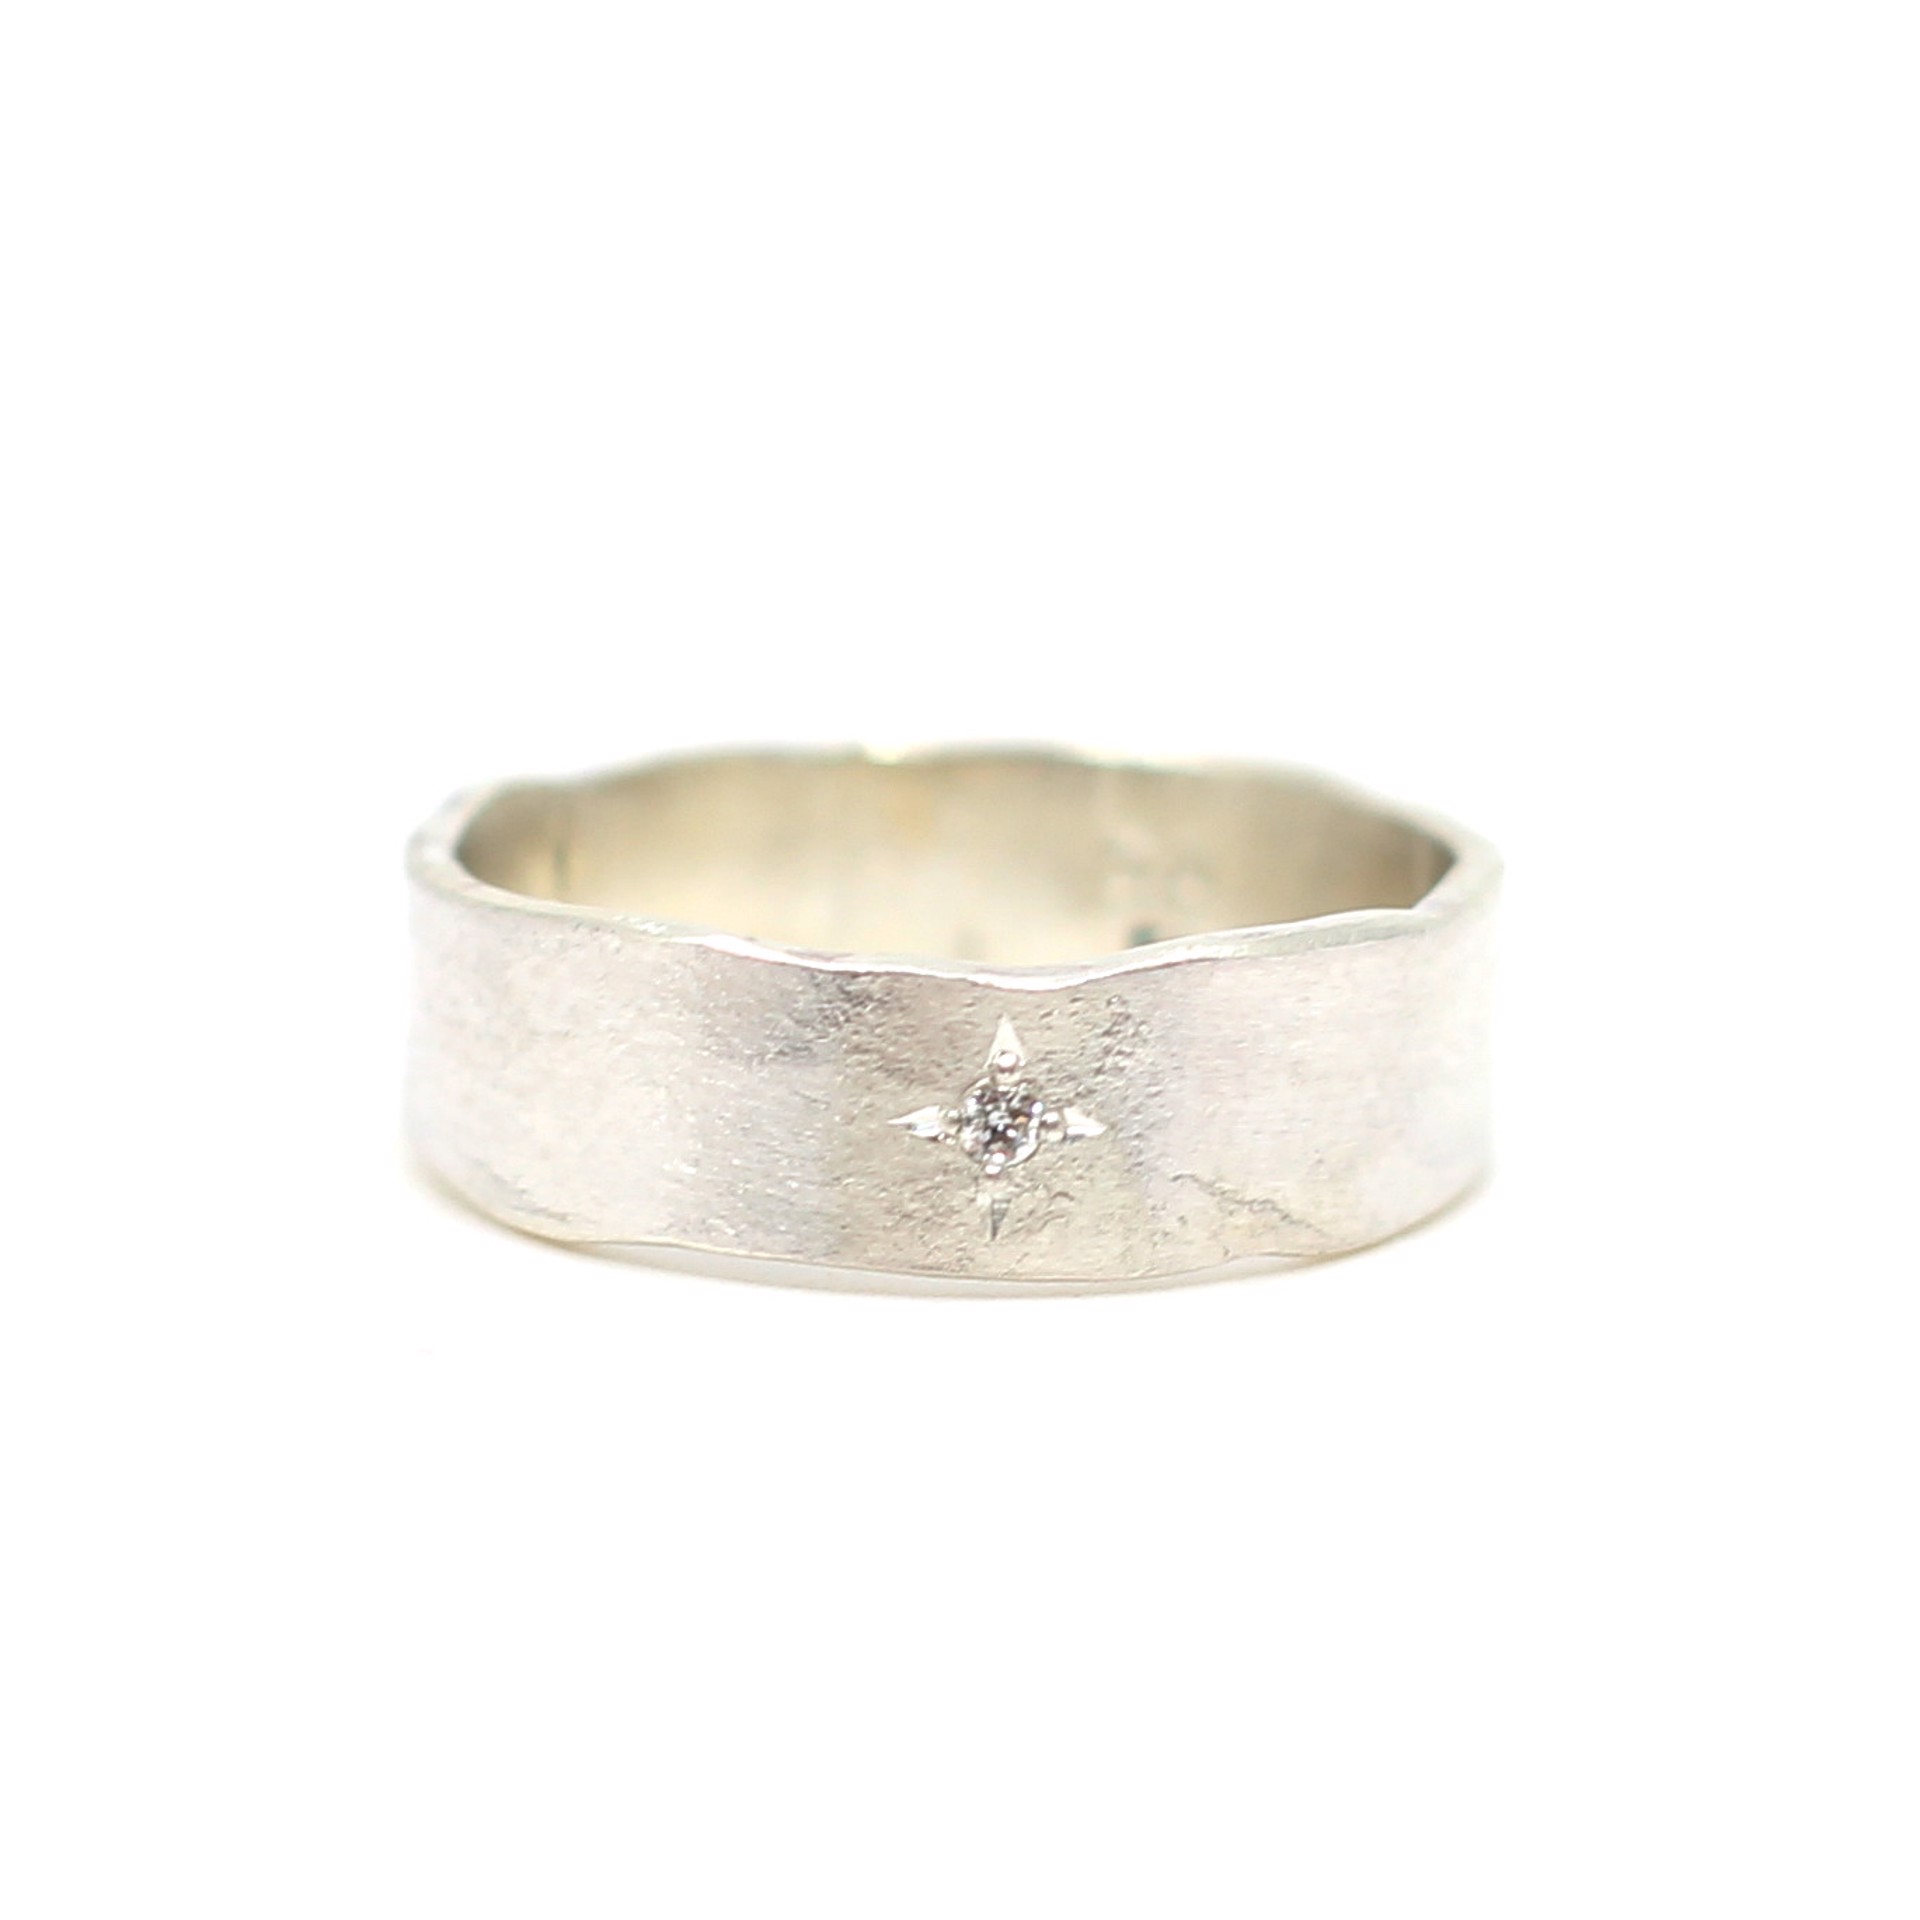 Single Star Ring (Size 7) by Leia Zumbro